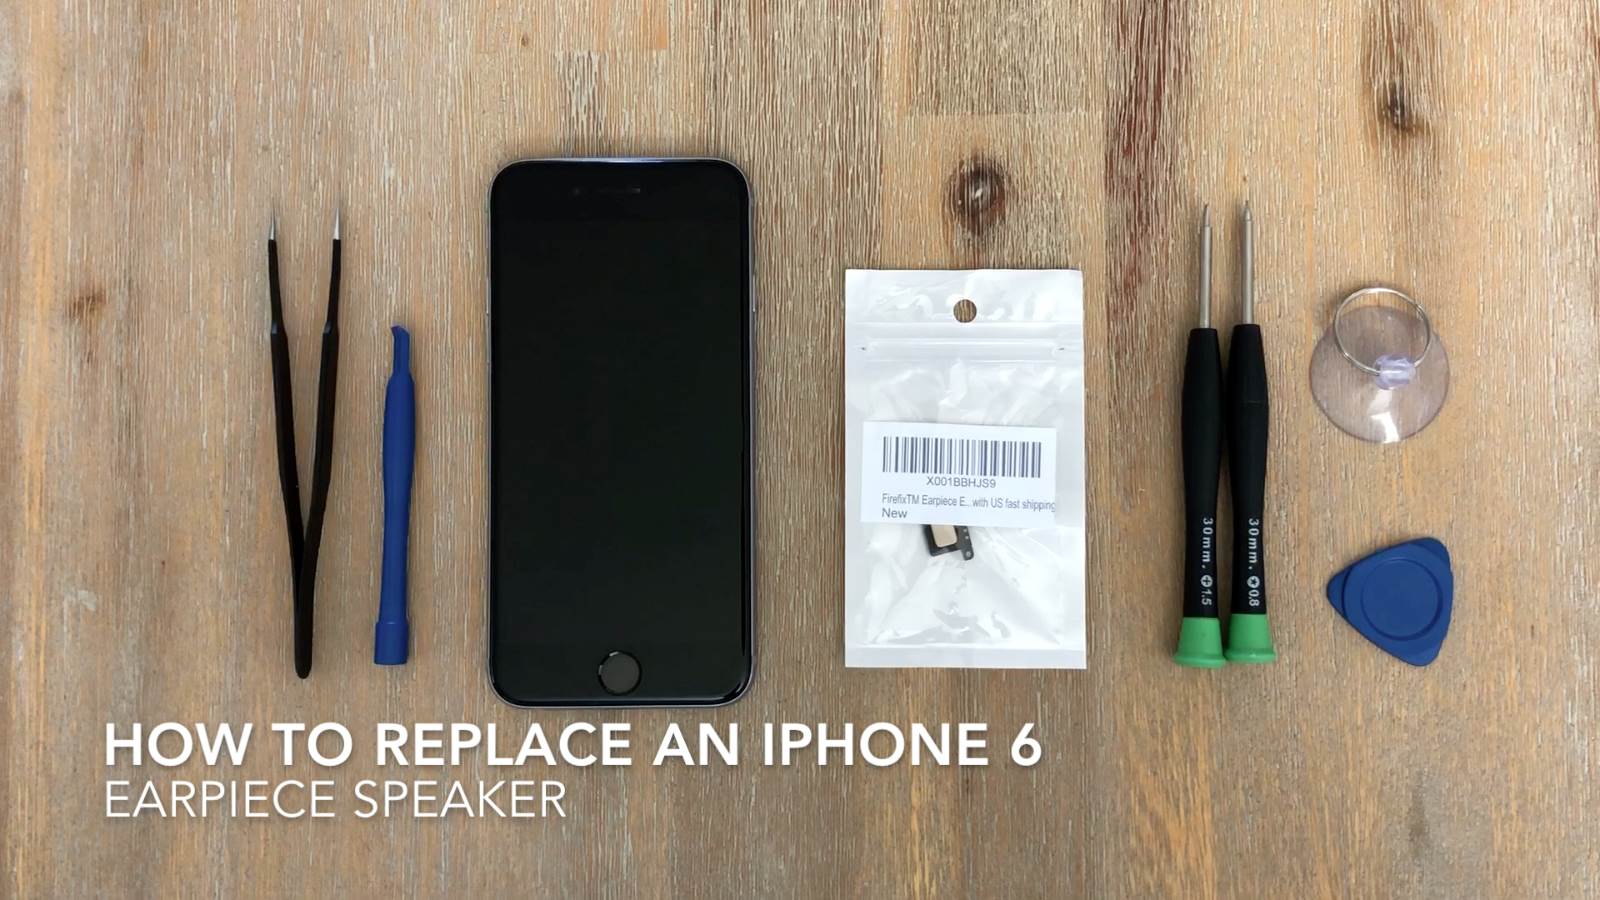 How to Replace The Earpiece Speaker on an iPhone 6